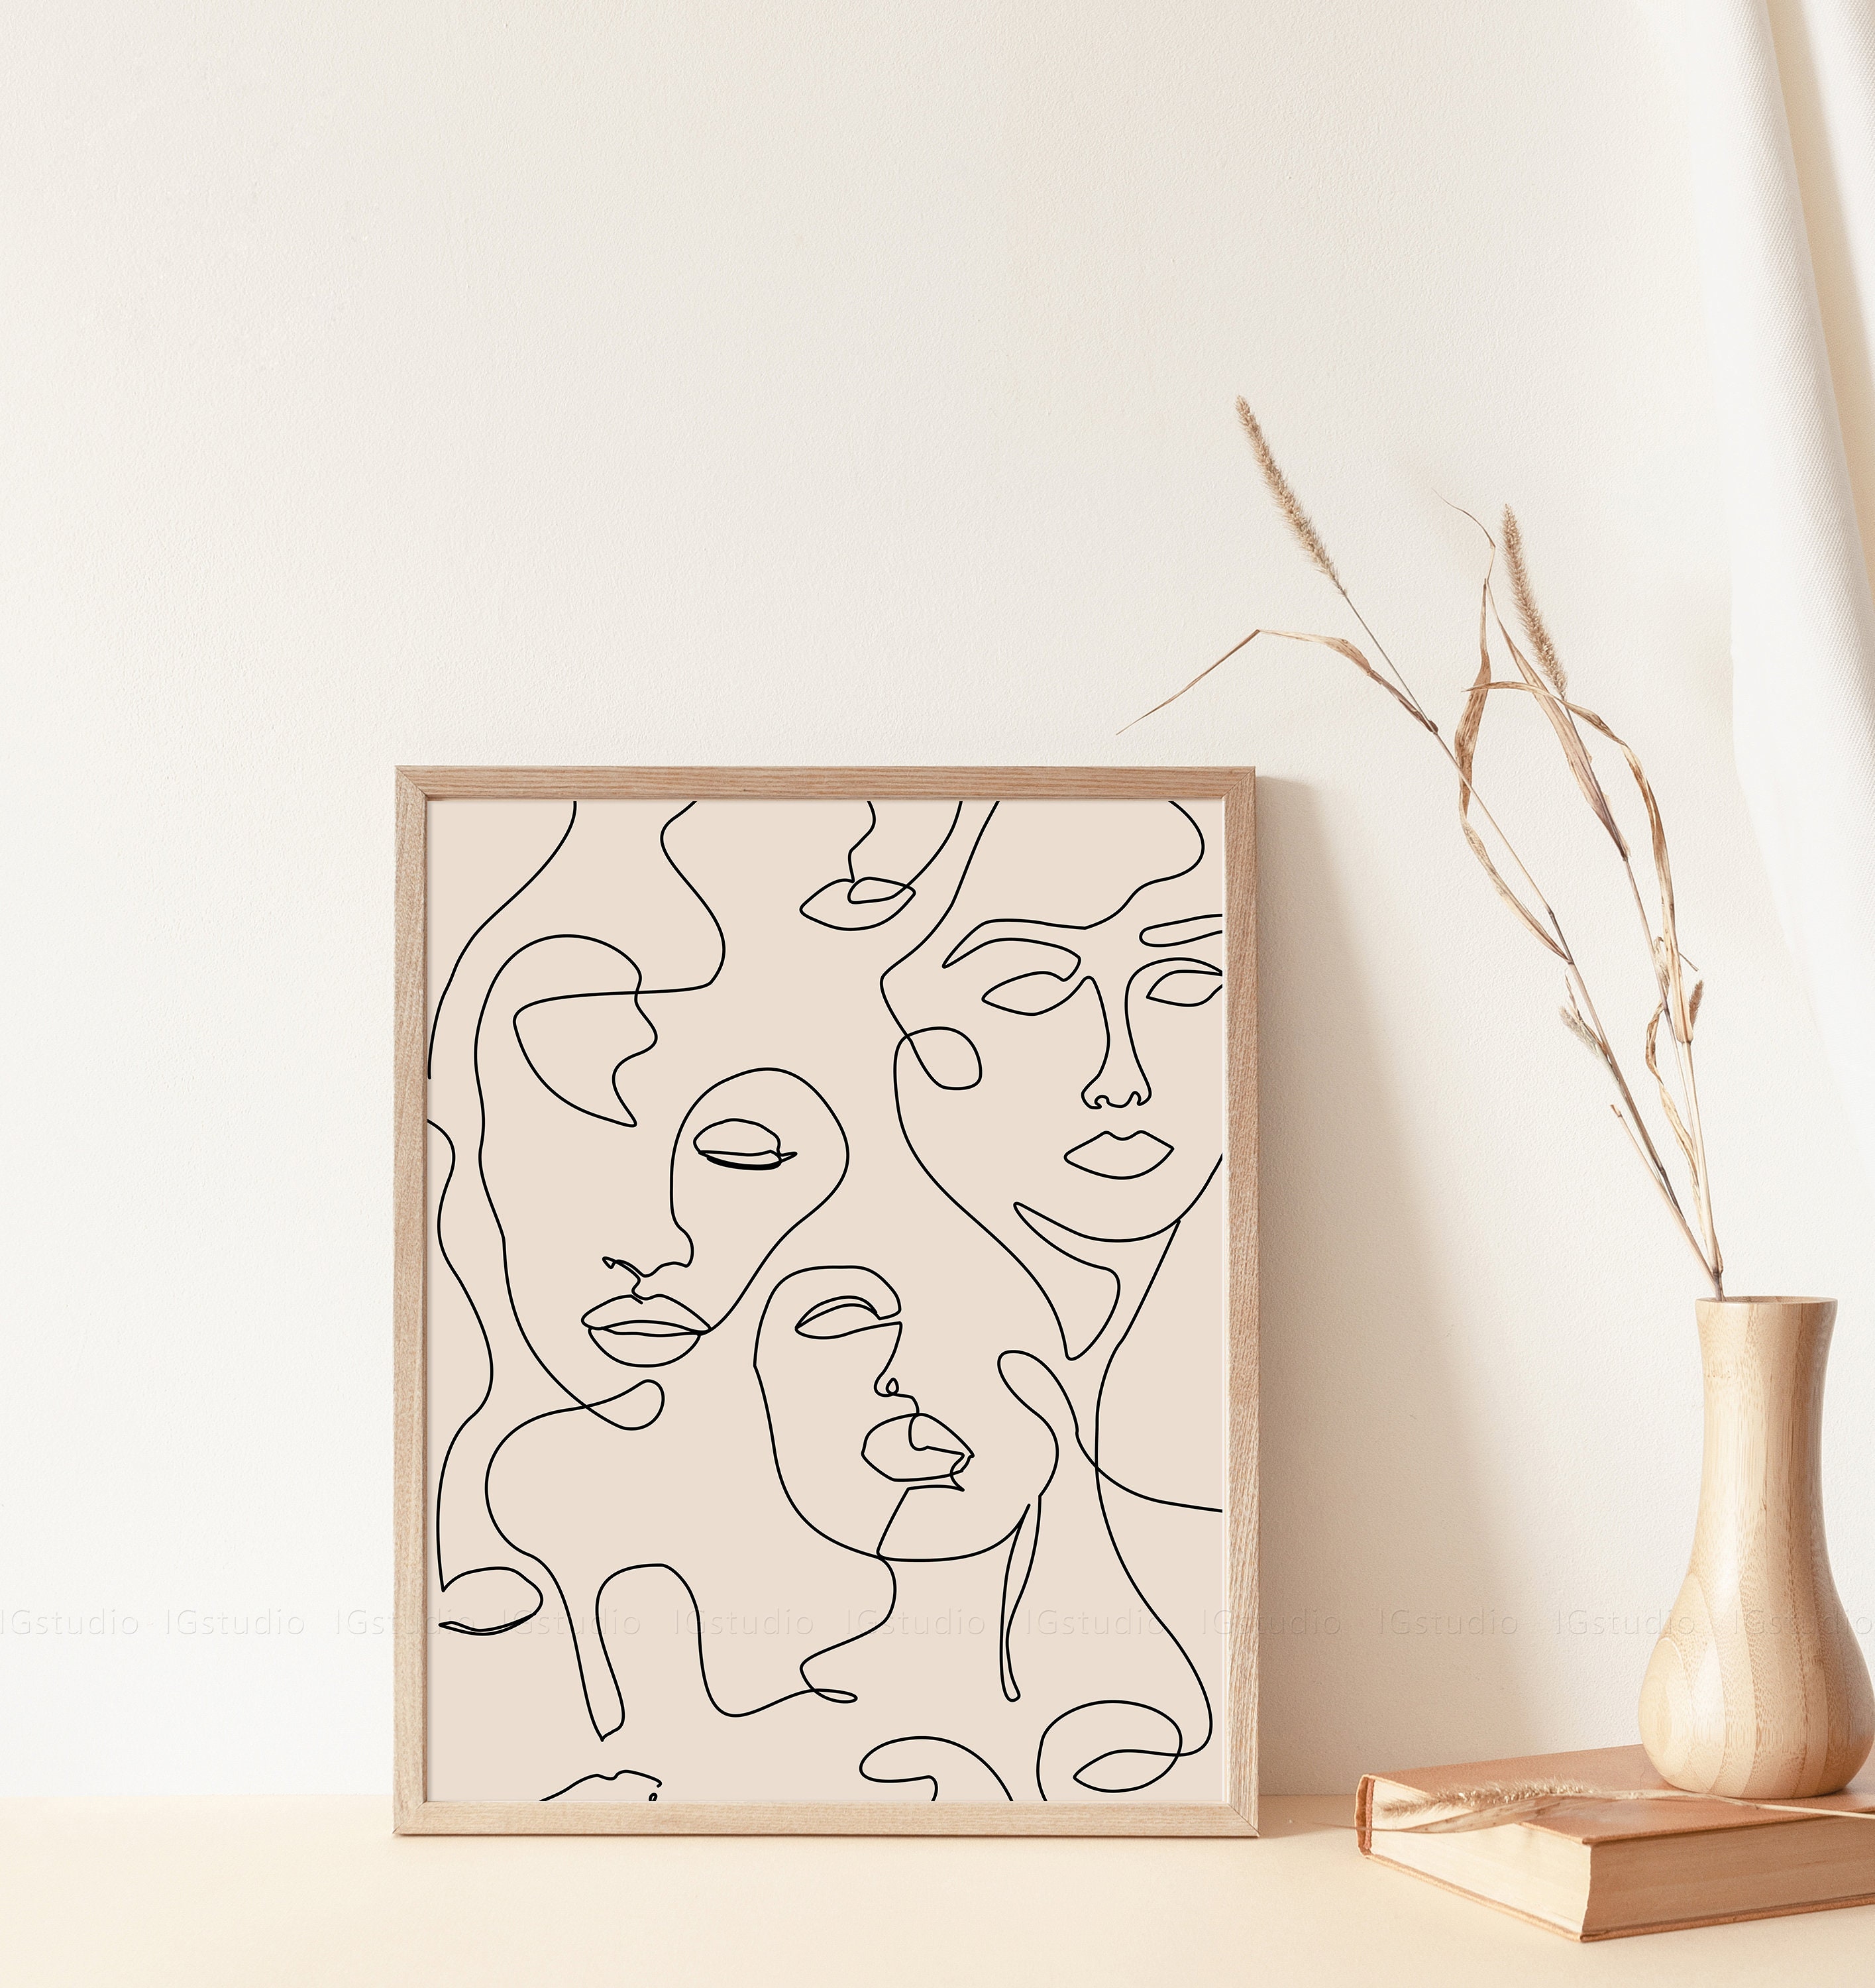 Abstract Line Art Face Poster, Woman One Line Drawing Poster, Continuous line, Female